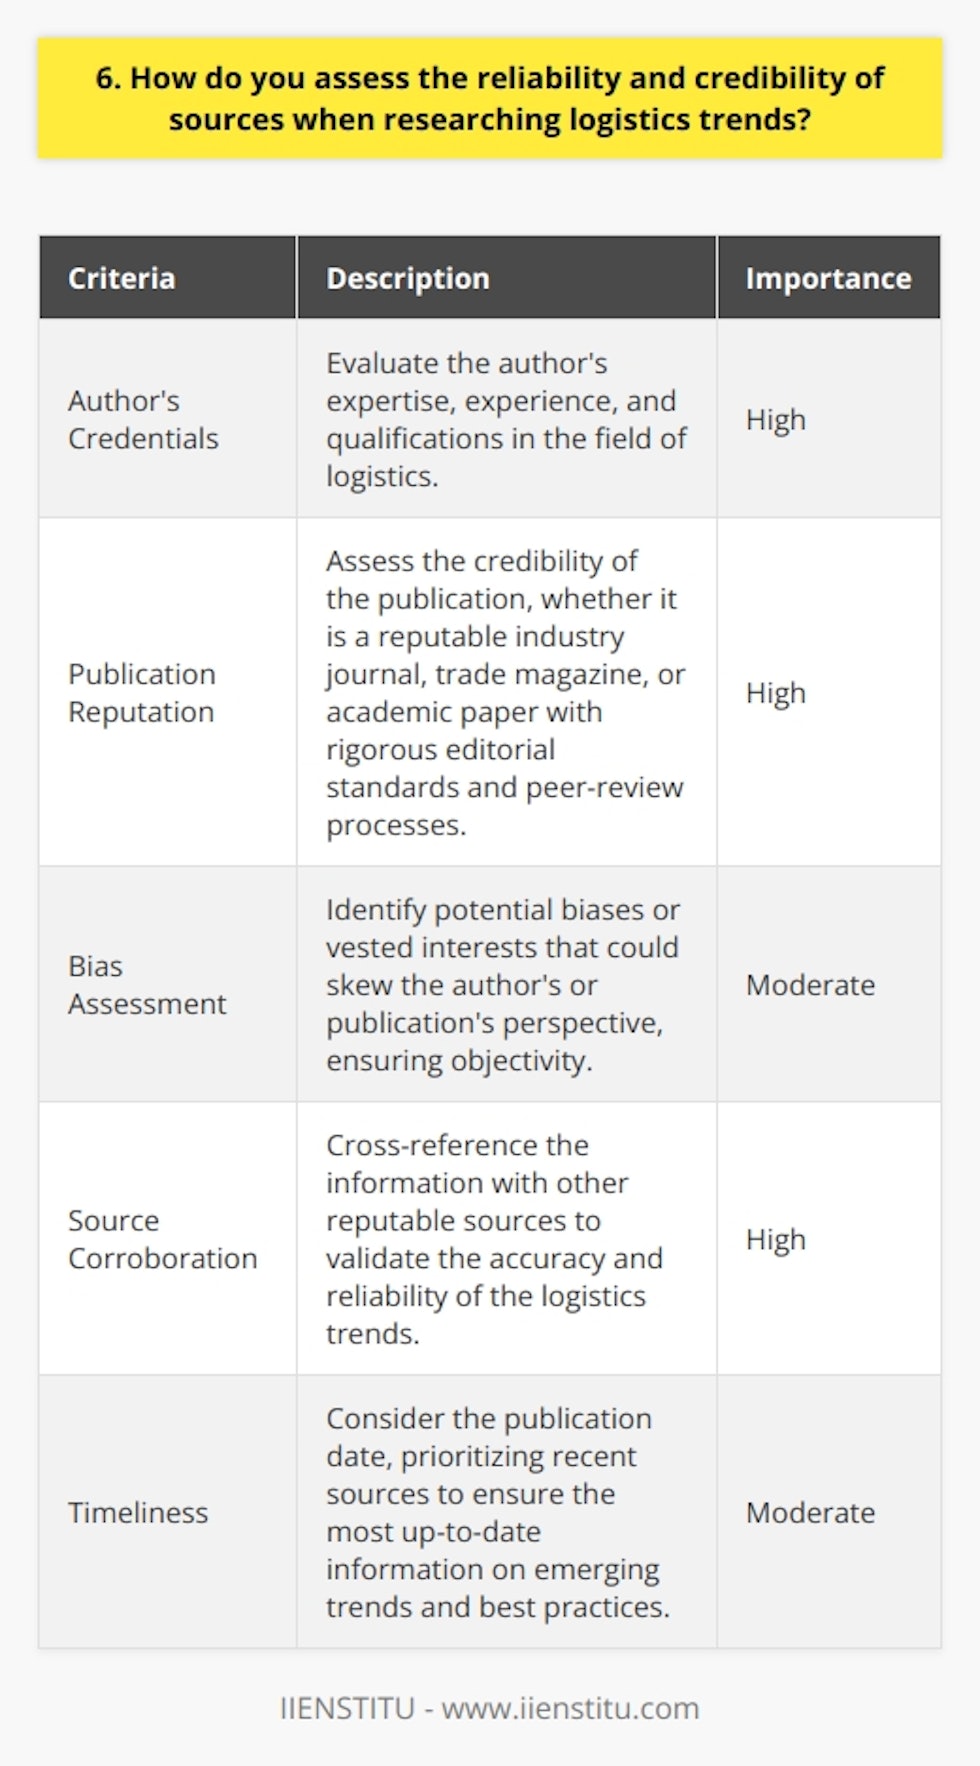 When assessing the reliability and credibility of sources for logistics trends, I start by looking at the authors credentials. I check if they have relevant expertise or experience in the field to ensure their insights are well-informed. Evaluating the Publication Next, I evaluate the publication itself. Is it a reputable industry journal, trade magazine, or academic paper? These sources typically have rigorous editorial standards and peer-review processes that enhance their credibility. Checking for Bias I also assess sources for potential biases. I ask myself if the author or publication has any vested interests that could skew their perspective. By identifying possible biases, I can better judge the objectivity of the information presented. Verifying with Other Sources To further validate the reliability of a source, I cross-reference the information with other reputable publications. If multiple credible sources corroborate the same logistics trends, it increases my confidence in the datas accuracy. Considering Timeliness Lastly, I consider the timeliness of the source. Logistics is a dynamic field, so I prioritize recent publications to ensure Im getting the most up-to-date information on emerging trends and best practices. By thoroughly vetting sources using these criteria, I can gather reliable insights to make informed decisions in my logistics role.